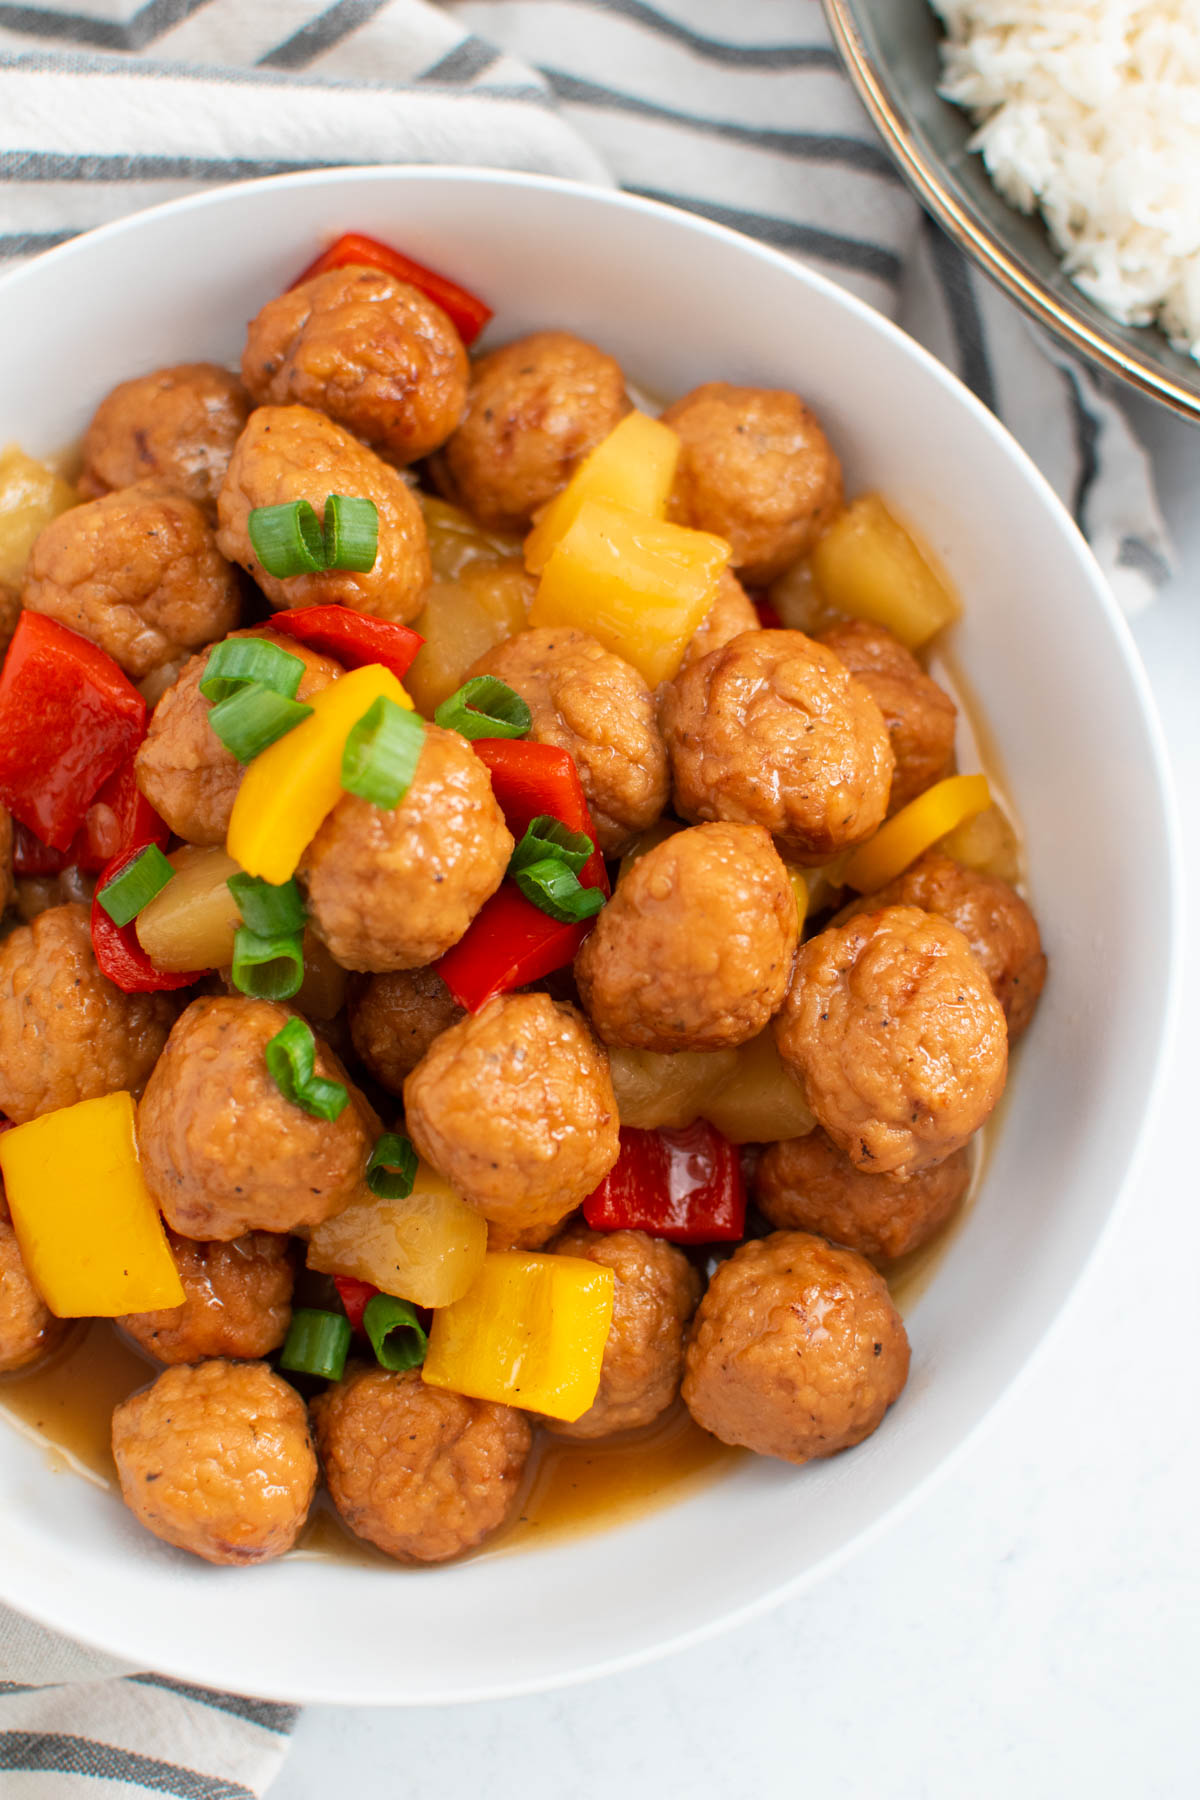 Sweet and sour meatballs in white bowl with pineapple chunks and chopped green onion garnish.